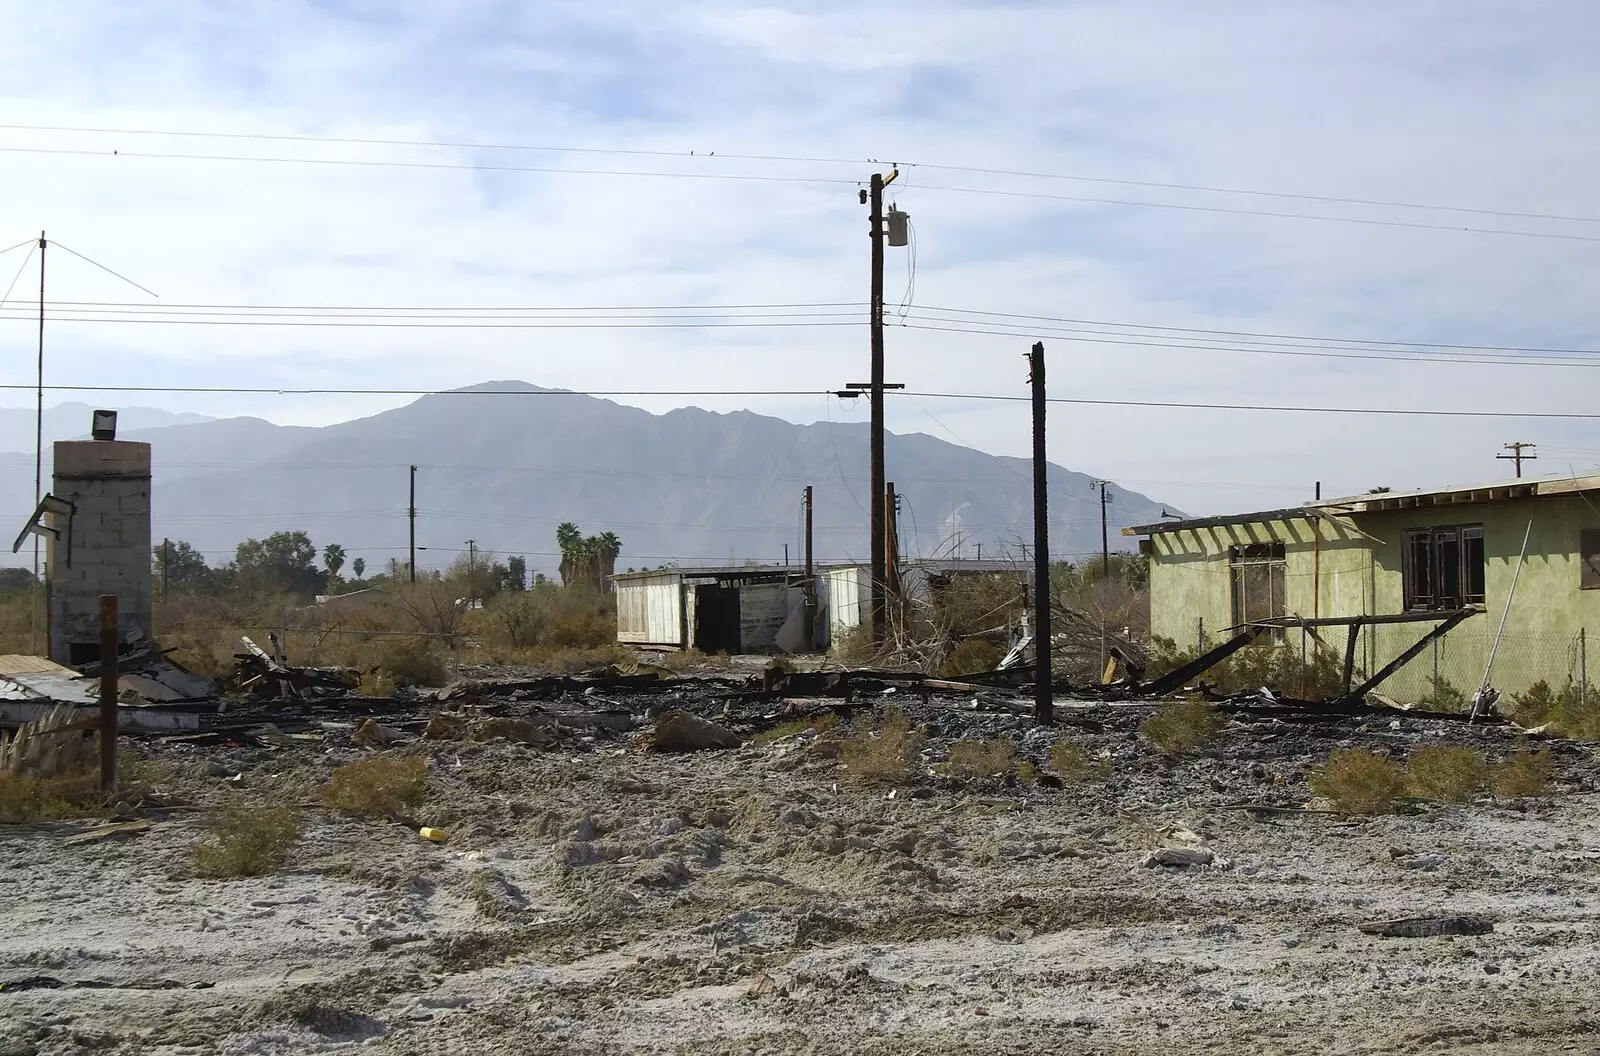 More dereliction and decay, from The End of the World: Julian to the Salton Sea and Back, California, US - 1st March 2008